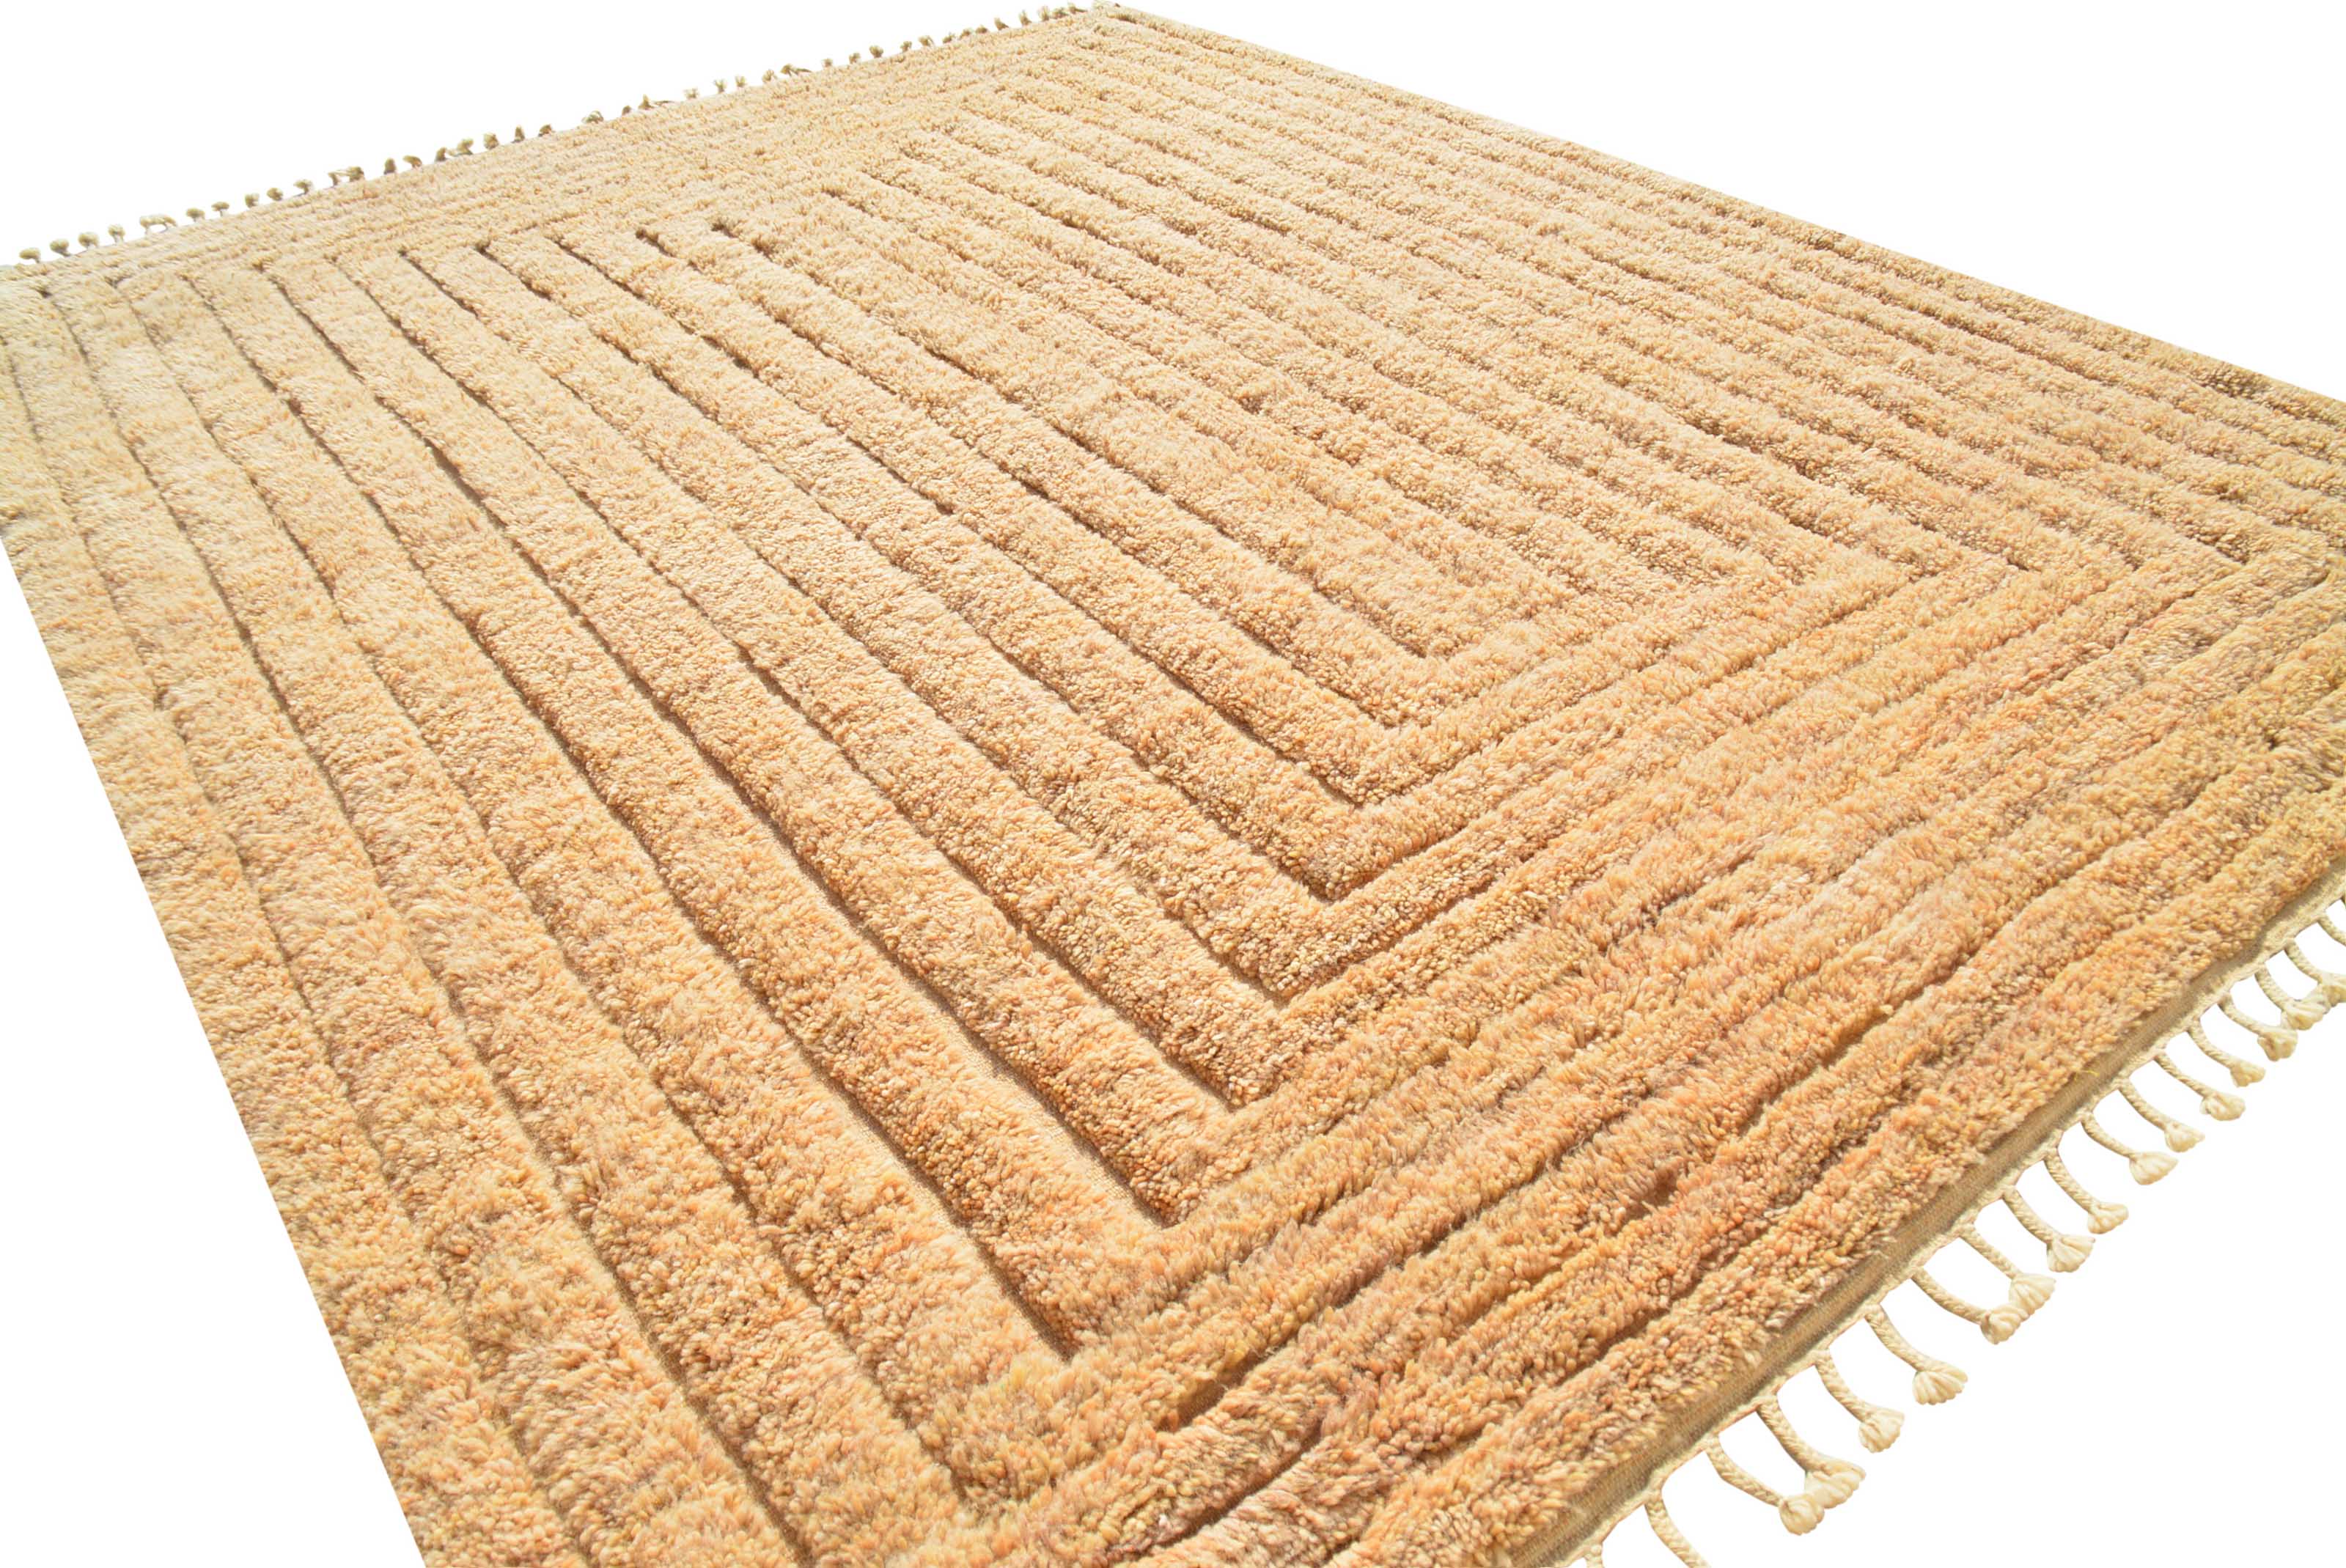 Winter Whispers: Handwoven Rug for a Touch of Winter Elegance